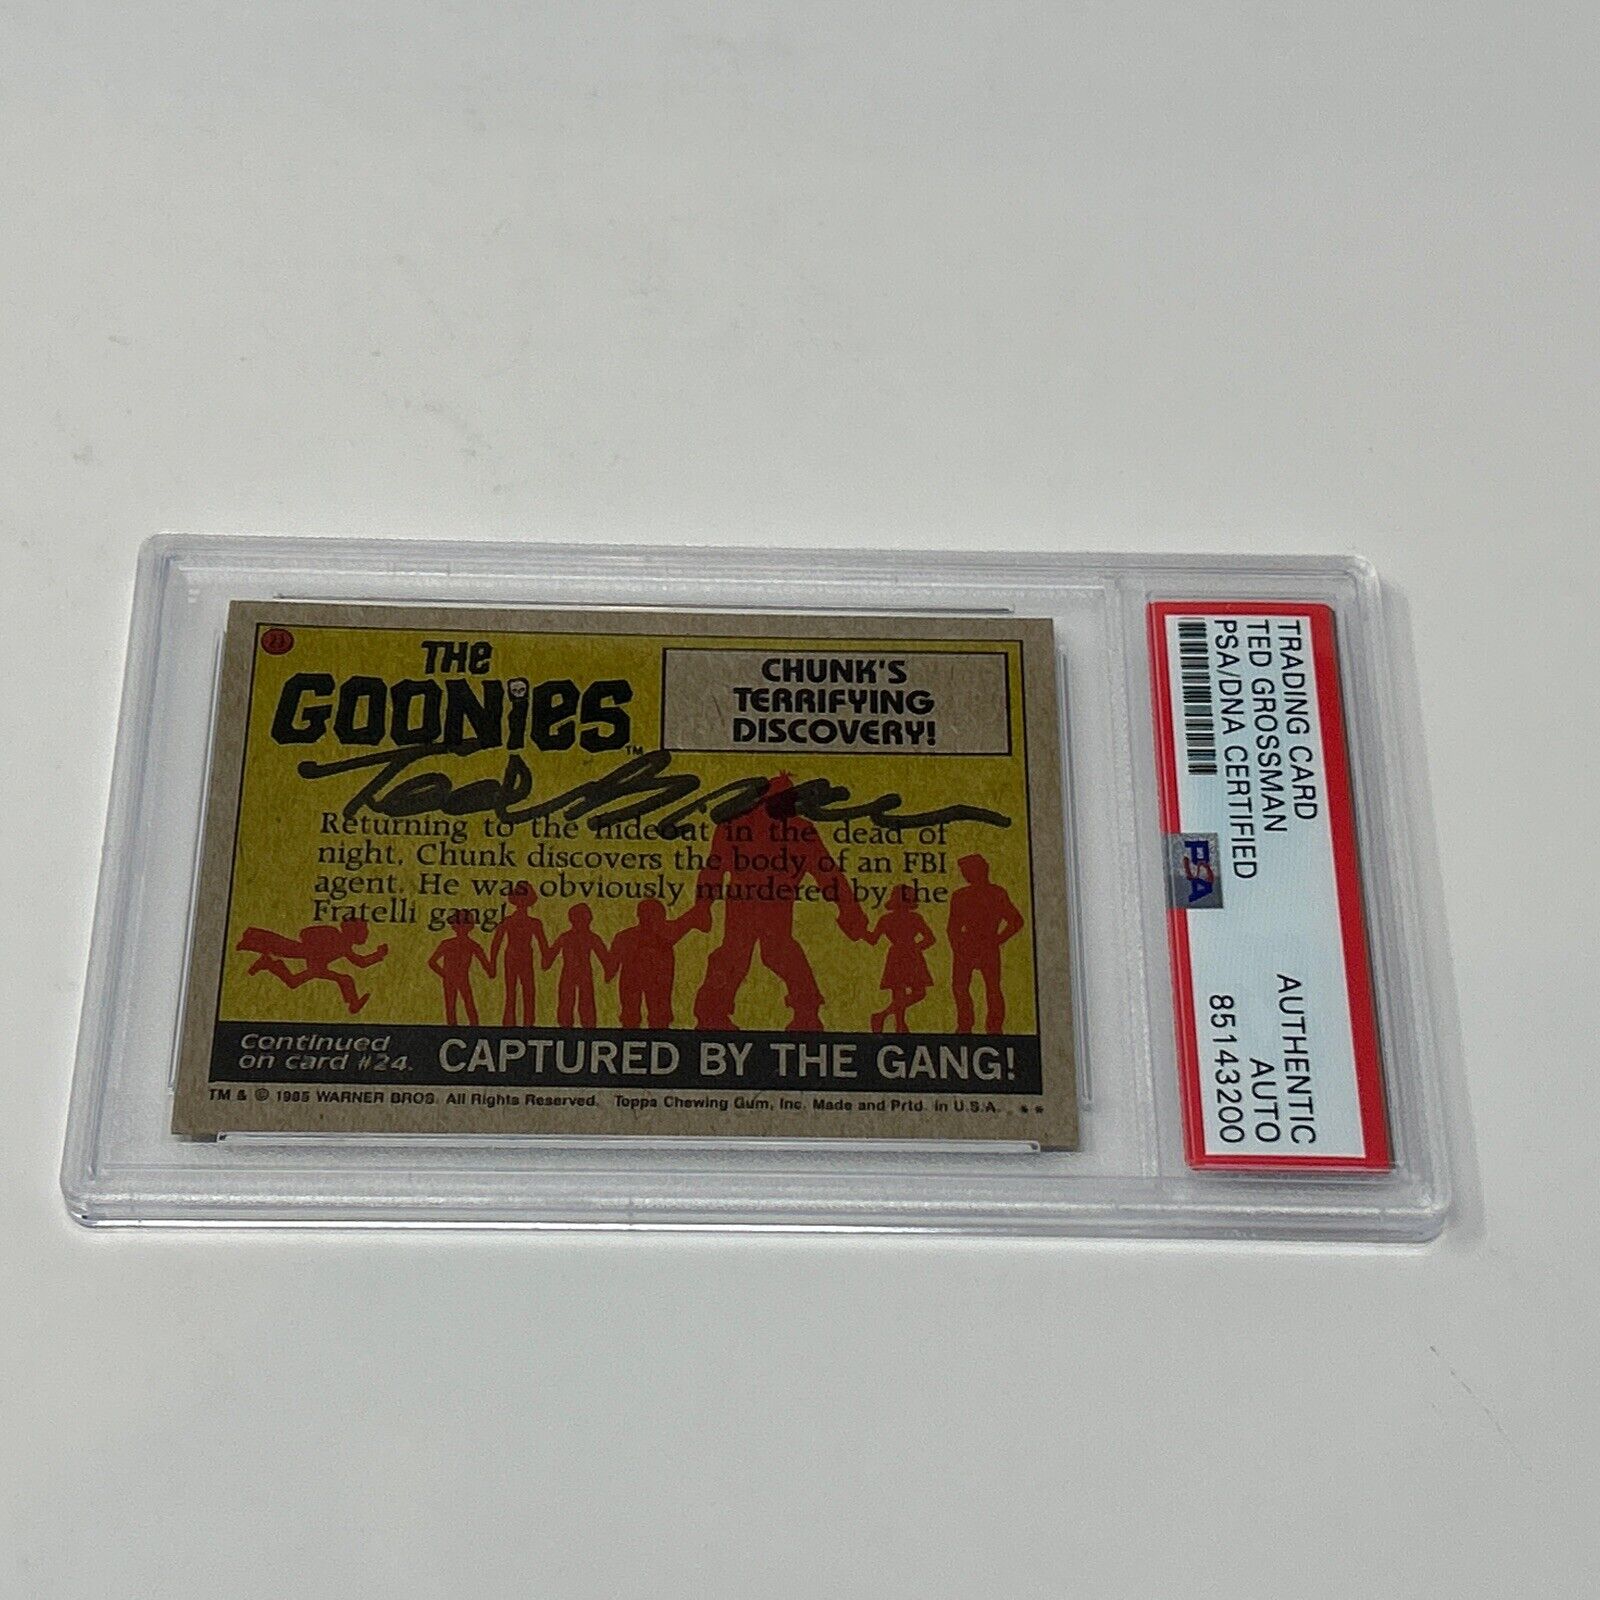 Signed Ted Grossman 1985 Goonies #23 Chunks Terrifying Discovery Auto PSA DNA